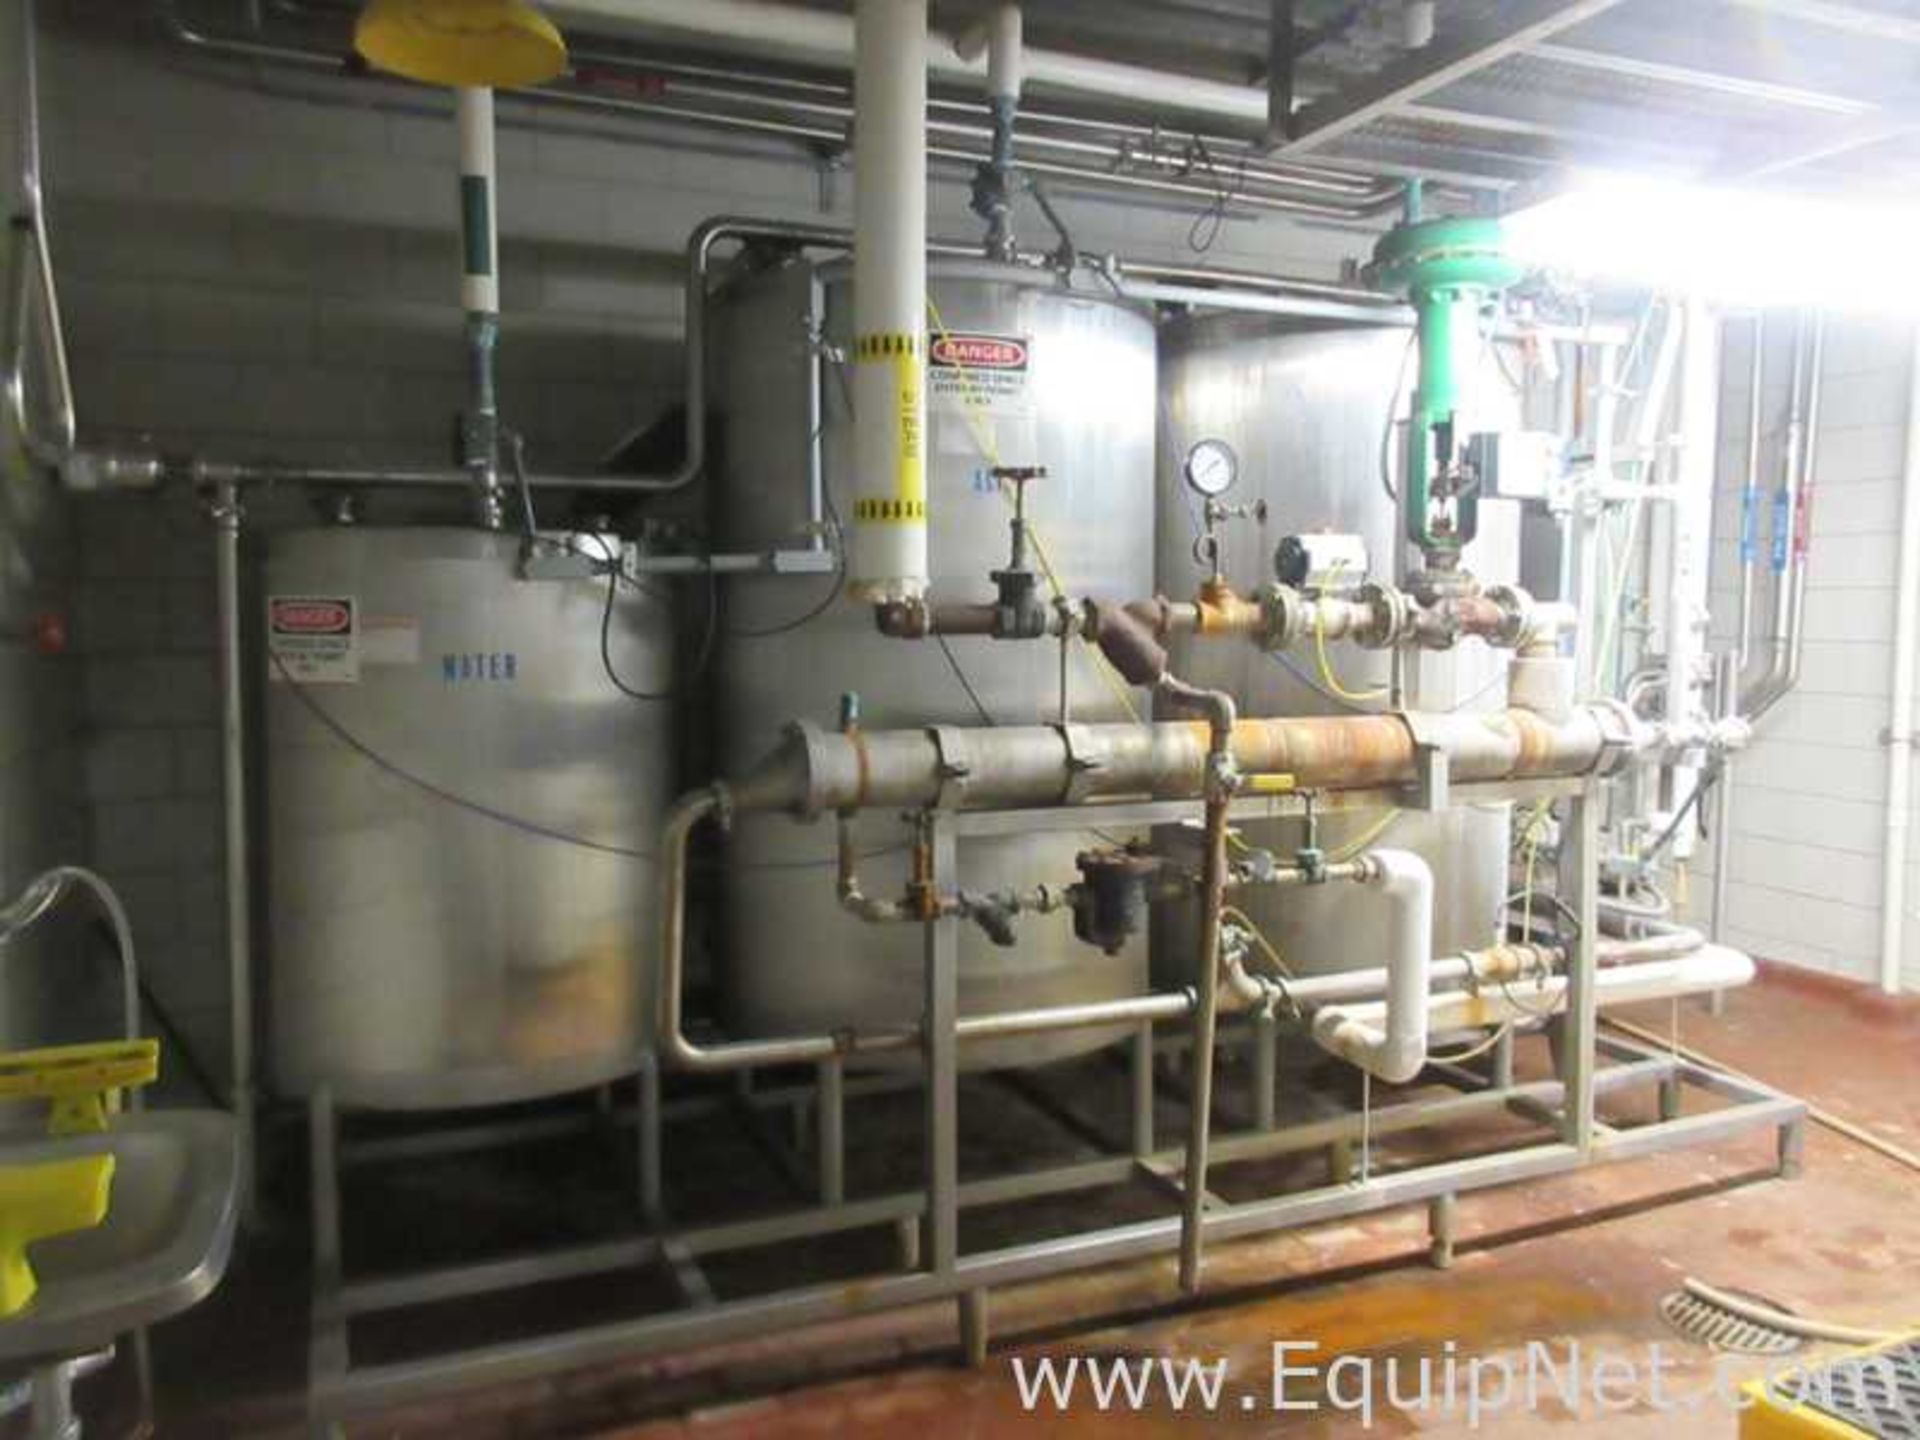 EQUIPNET LISTING #775980; REMOVAL COST: $15,754.00; DESCRIPTION: CIP System With Three Tanks,